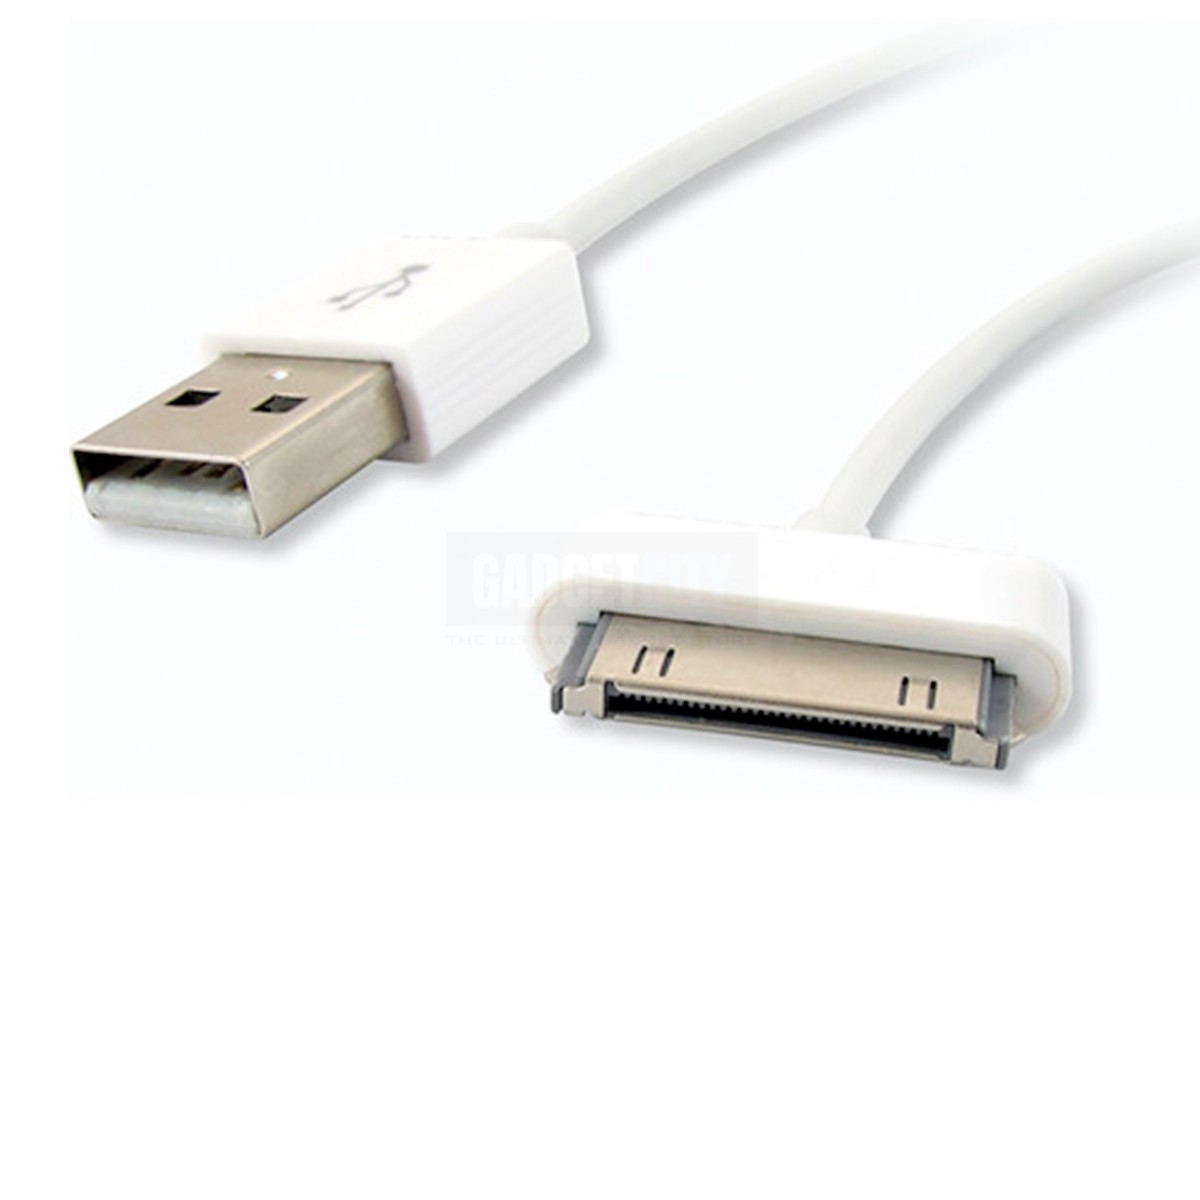 IPad Cable ( White) Gadget